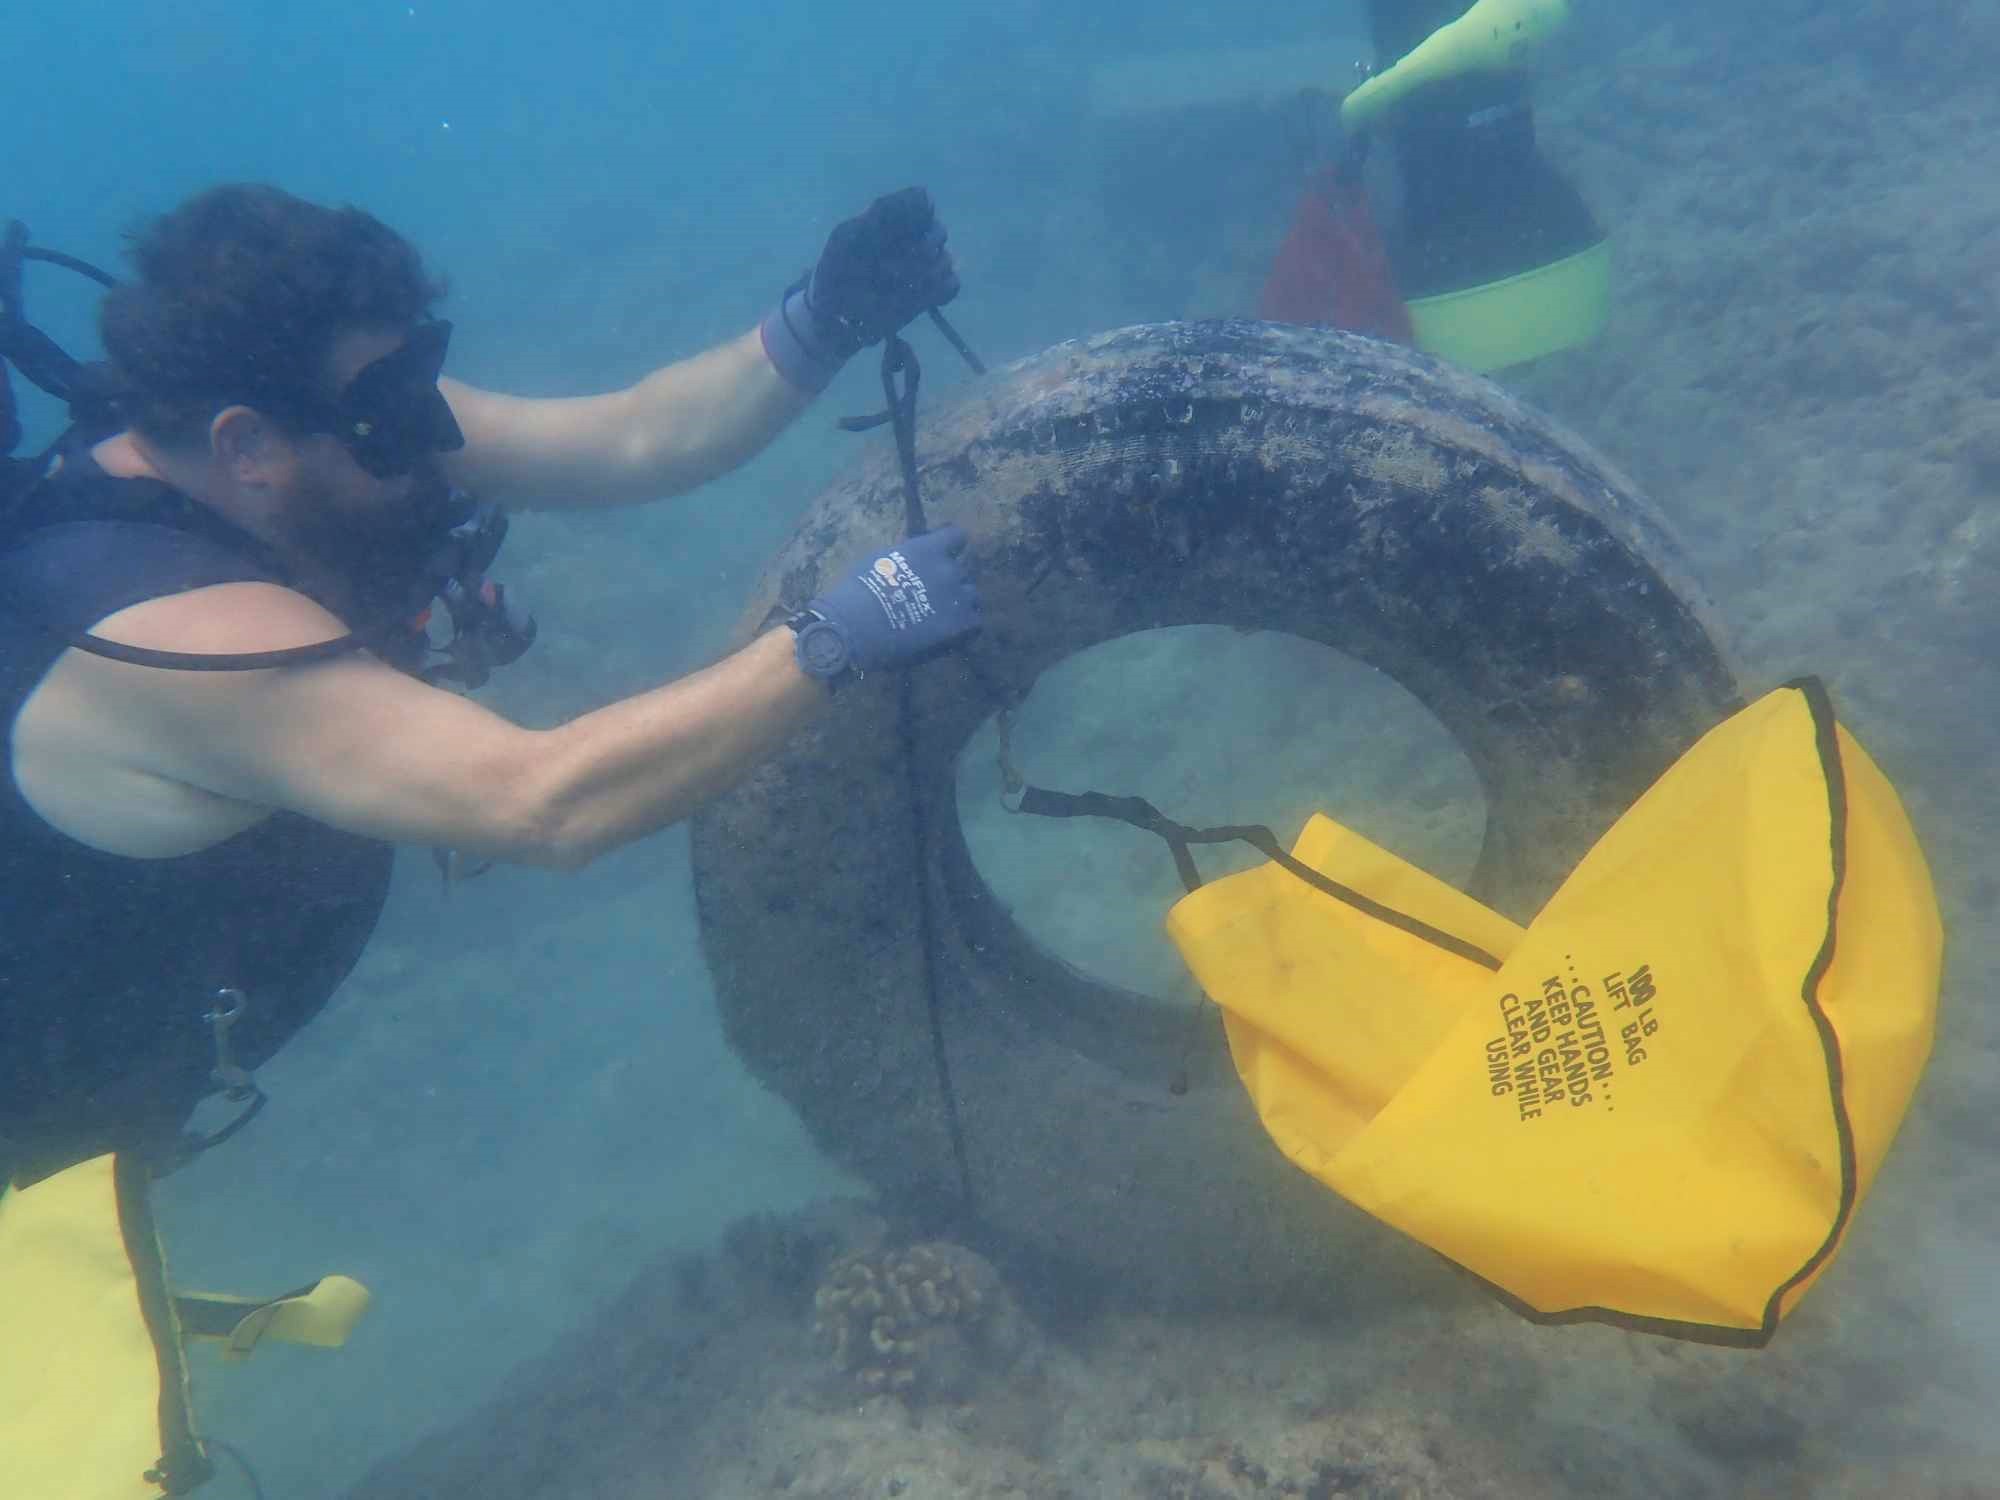 Nudi Wear volunteer Jim Sowa using a lift bag to remove a tire from the ocean in Hawaii